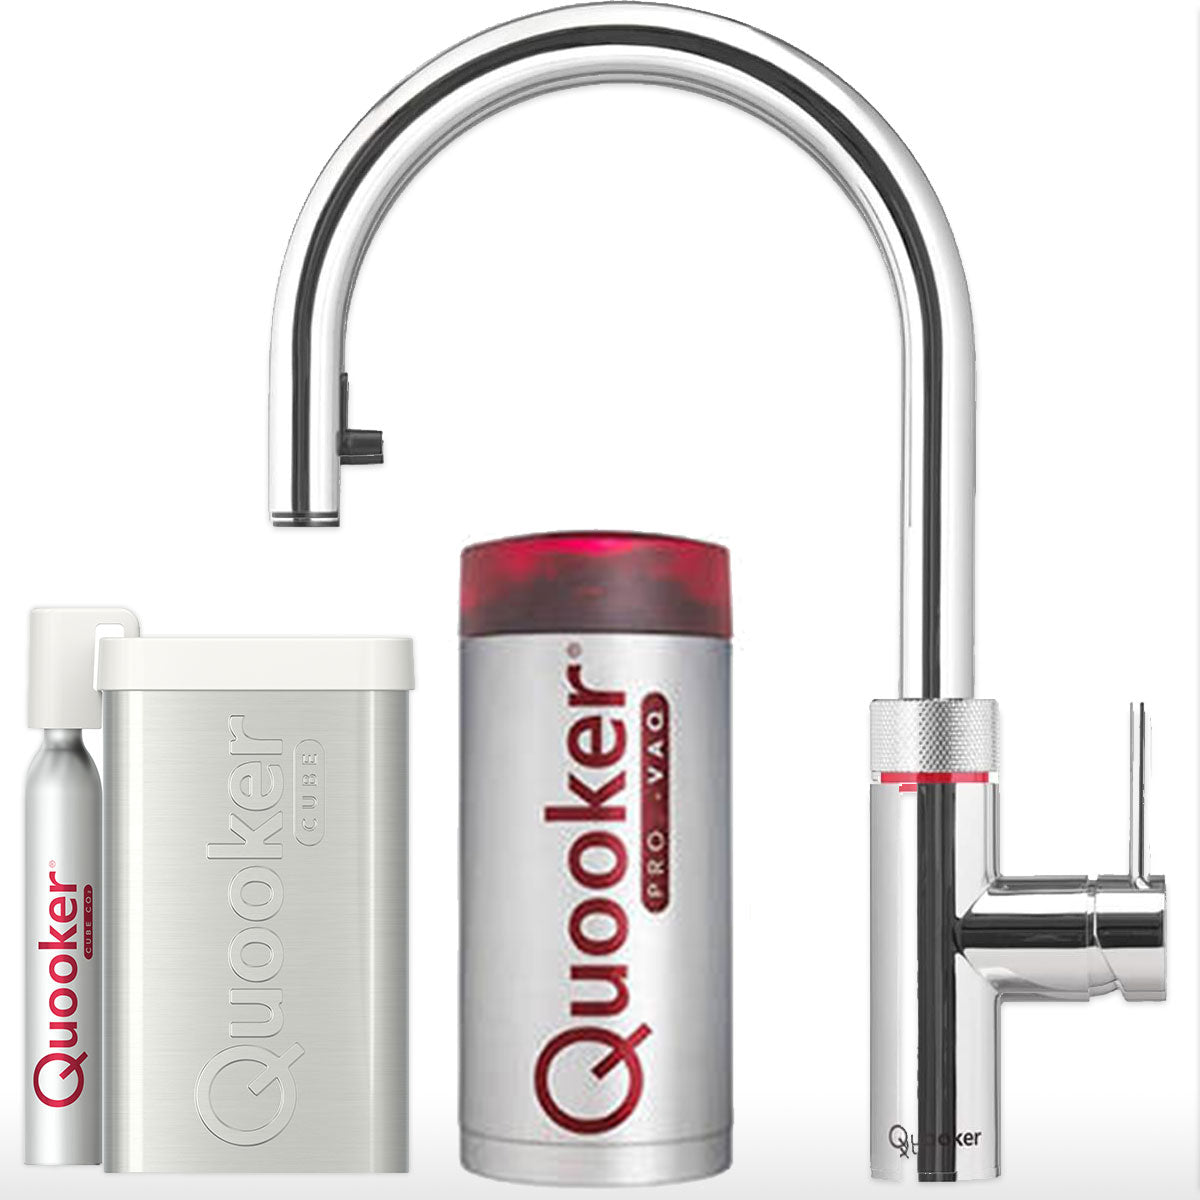 Quooker Flex Boiling Mixer Tap With Pro 3 Tank and CUBE Sparkling Water Dispenser